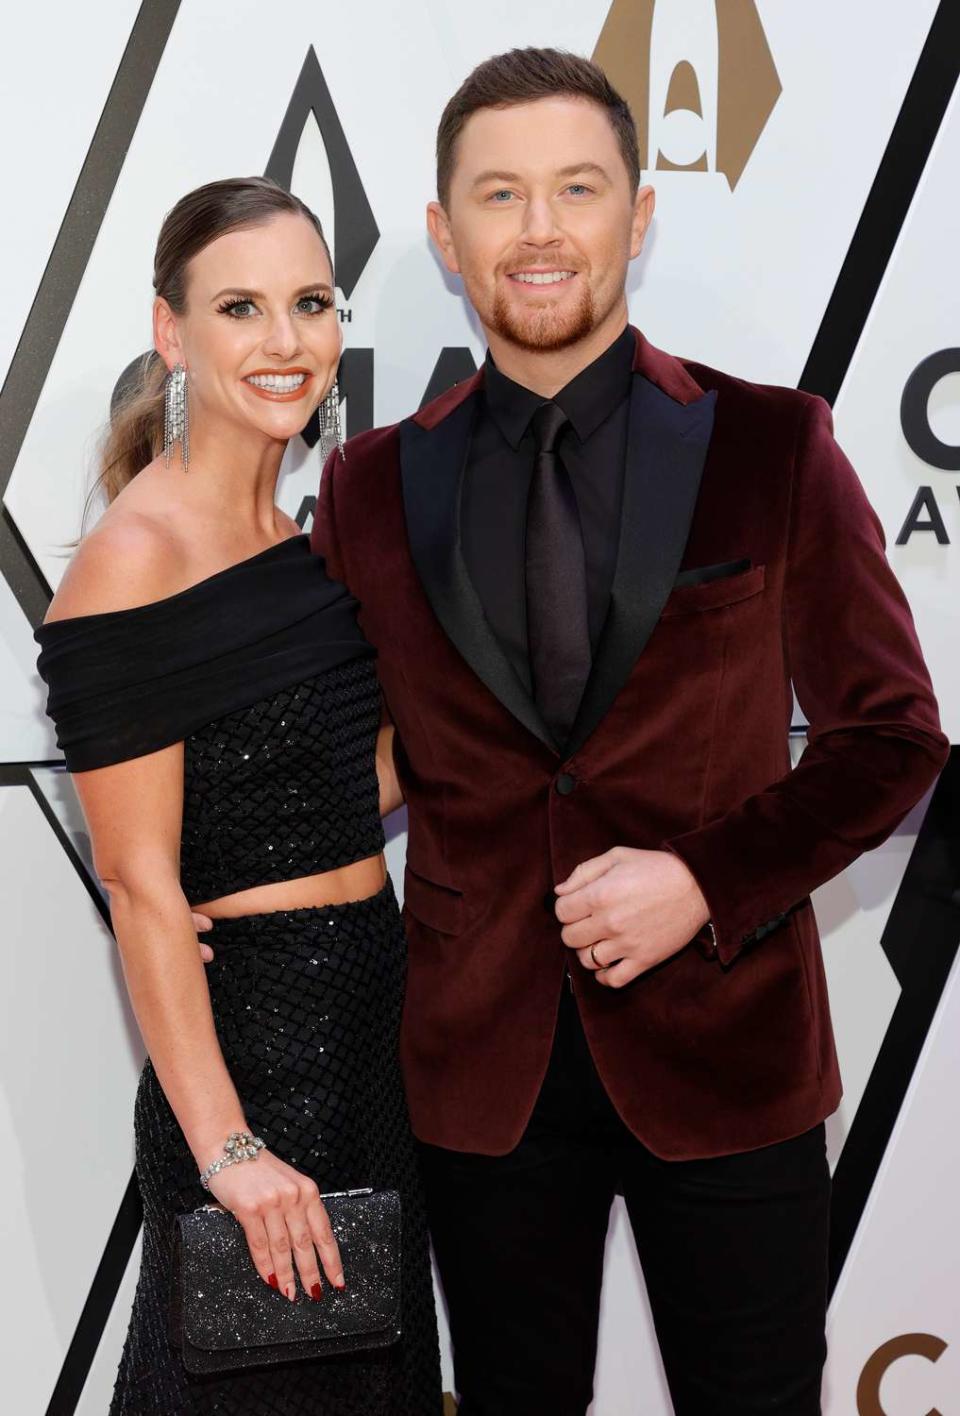 Gabi Dugal McCreery and Scotty McCreery attend the 55th annual Country Music Association awards at the Bridgestone Arena on November 10, 2021 in Nashville, Tennessee.